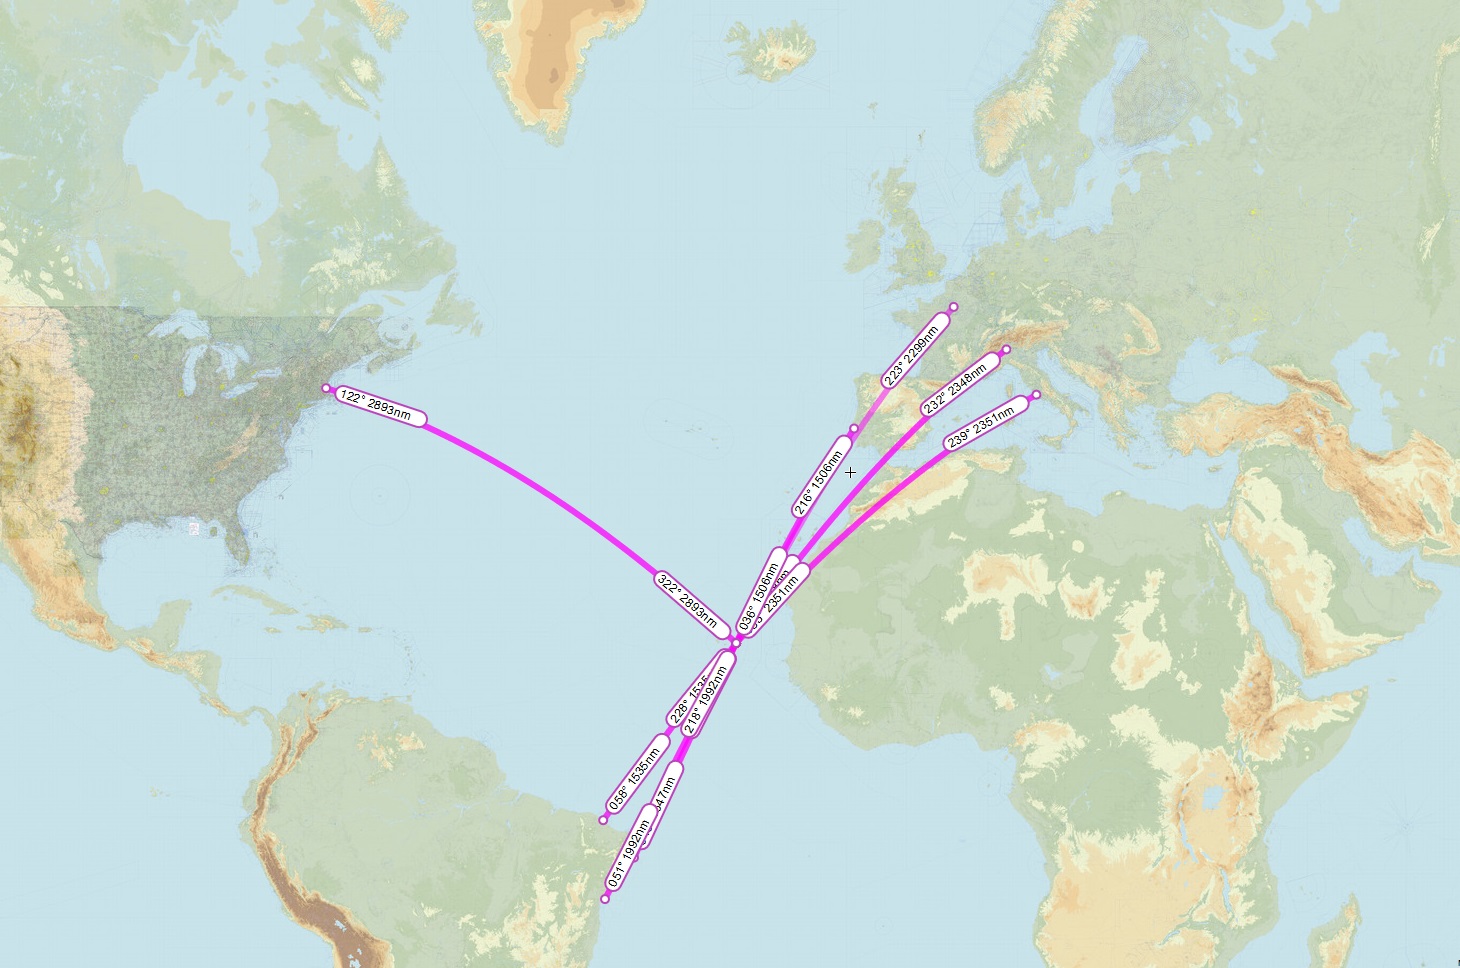 Strategic location of Cape Verde for trans-Atlantic flights between Europe and Americas // Source: Skyvector